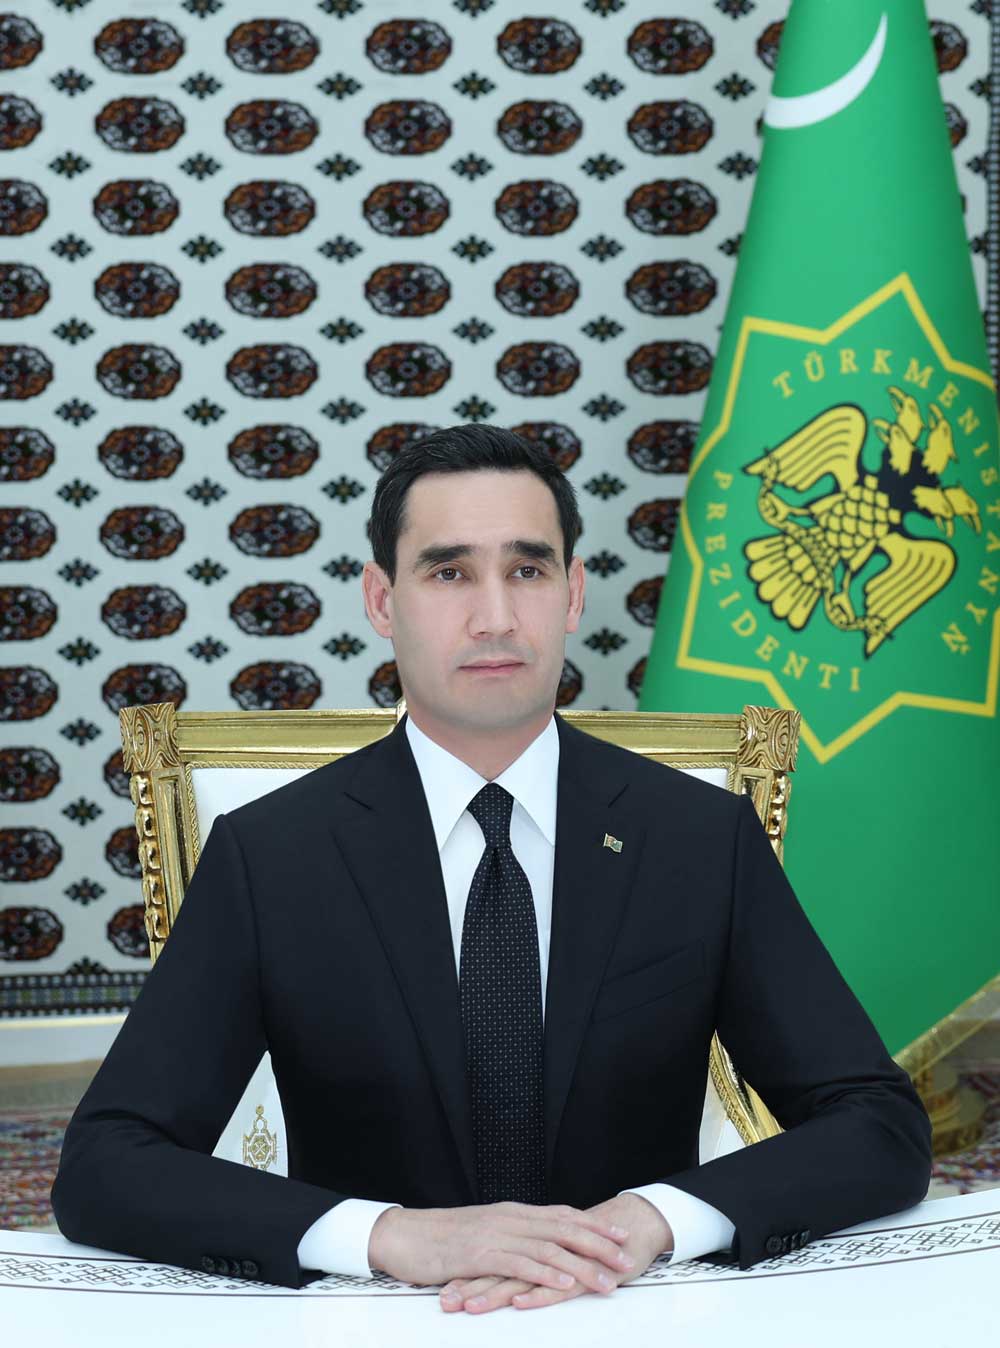 The President of Turkmenistan held a working meeting via a digital system